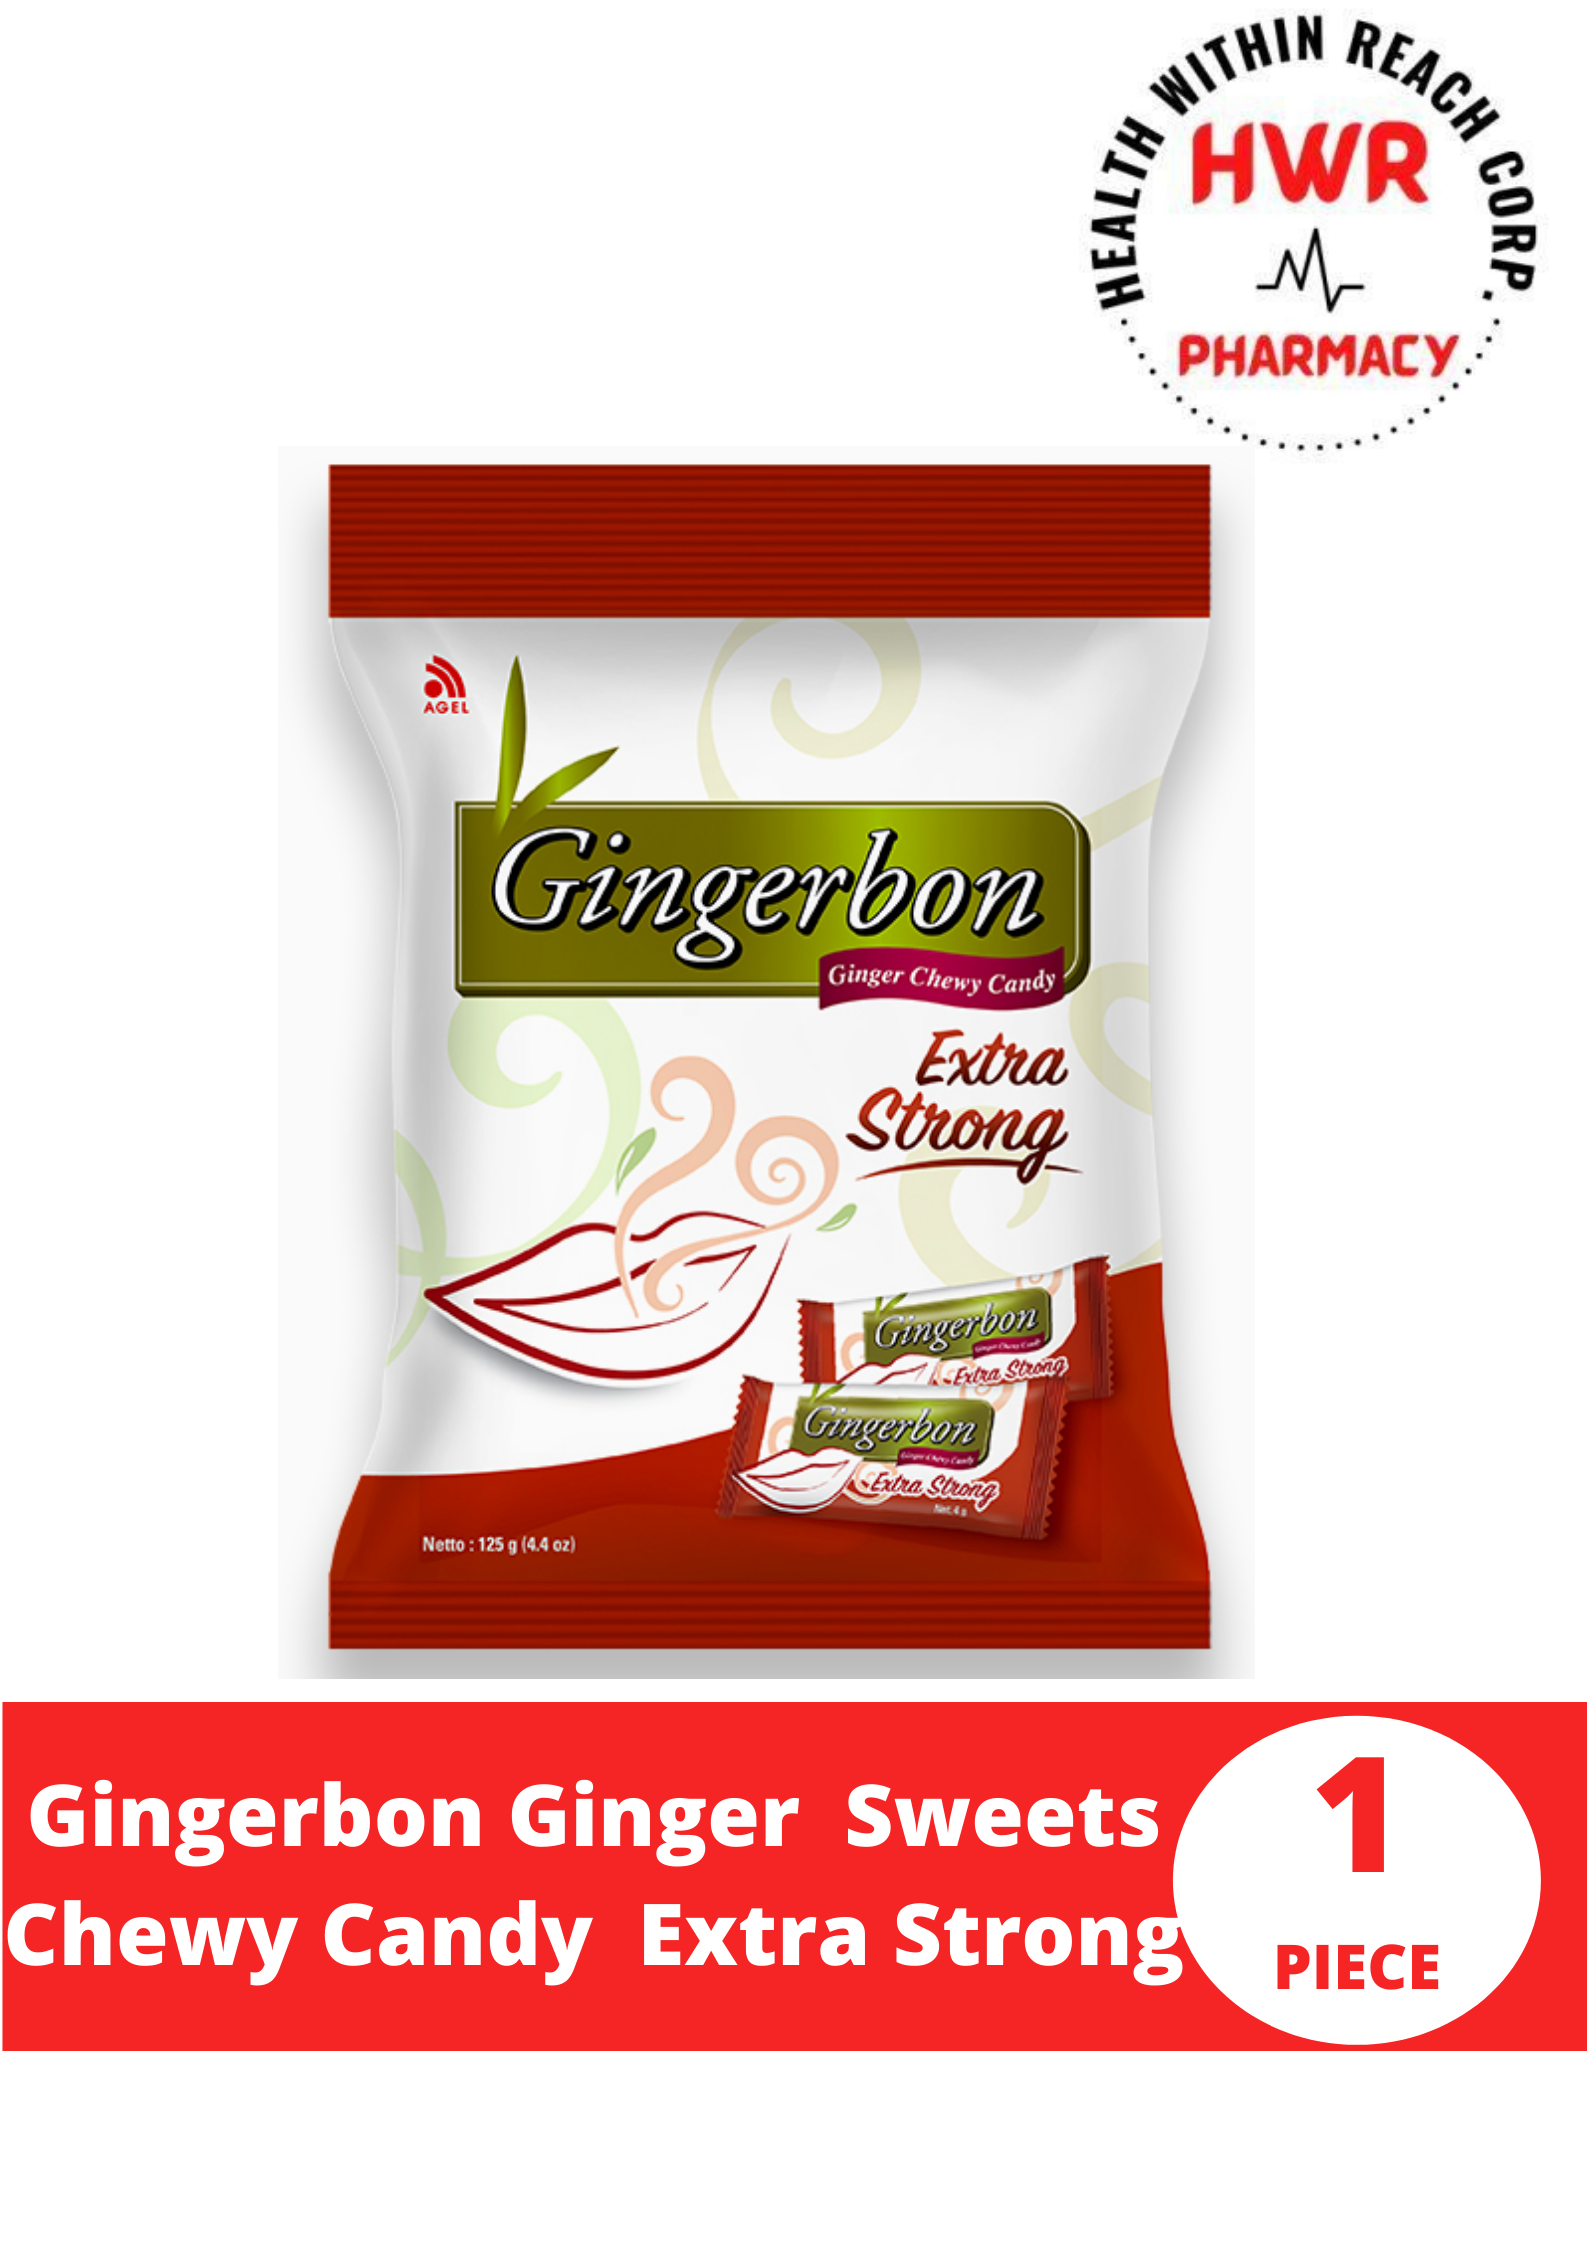 Gingerbon Ginger Sweets Chewy Candy Extra Strong Lazada Ph